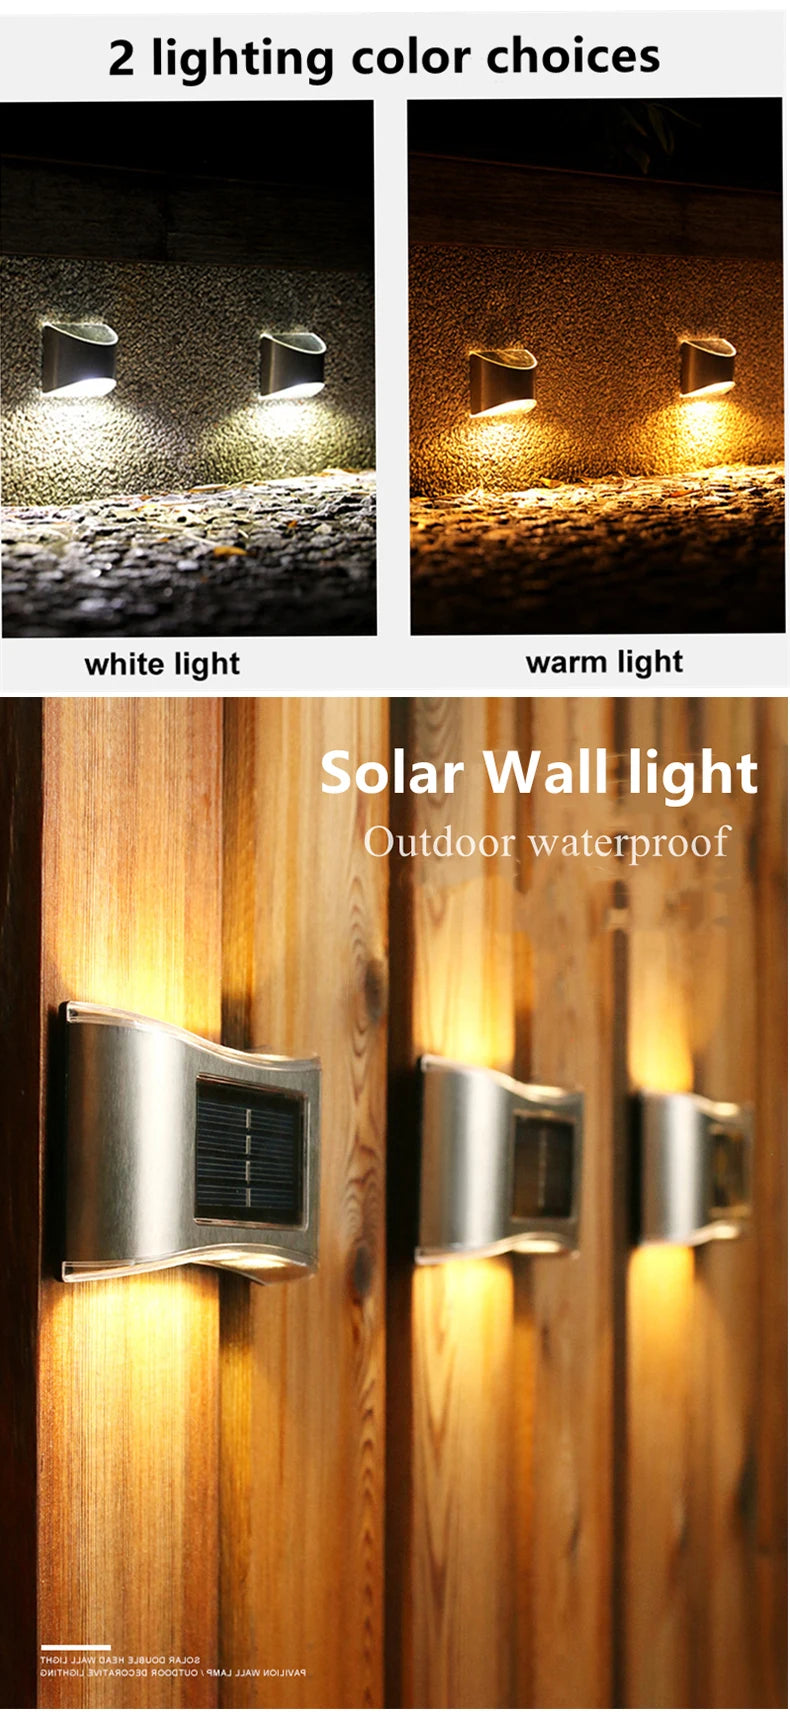 LED Solar Wall Light, Waterproof solar-powered wall light with warm or white lighting option for outdoor use.